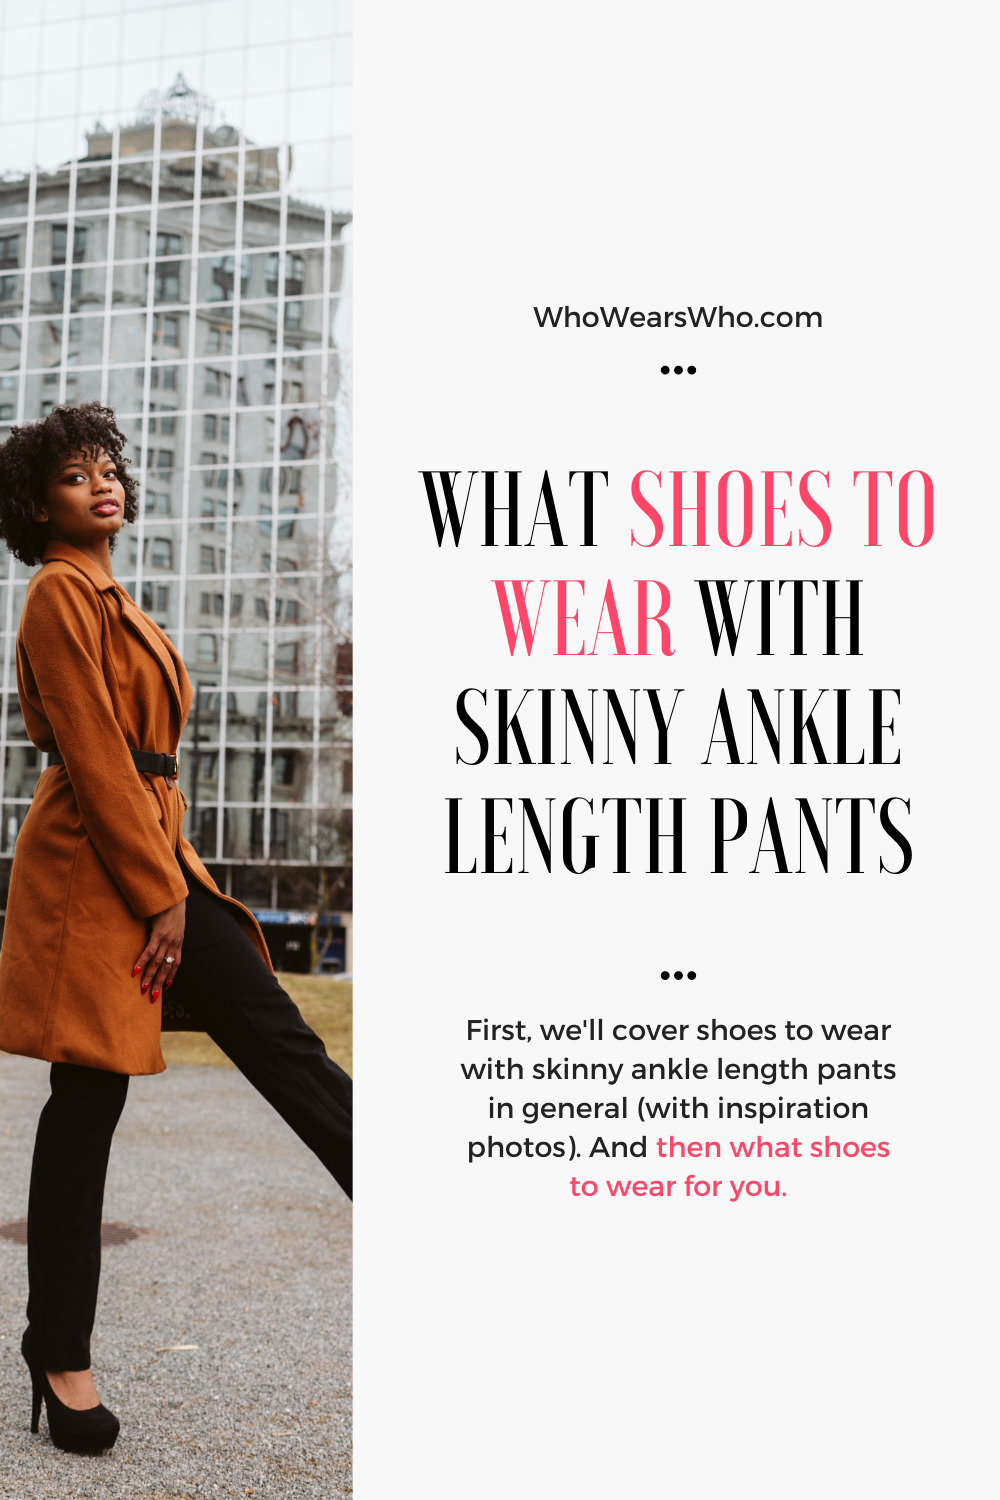 What shoes to wear with skinny ankle length pants